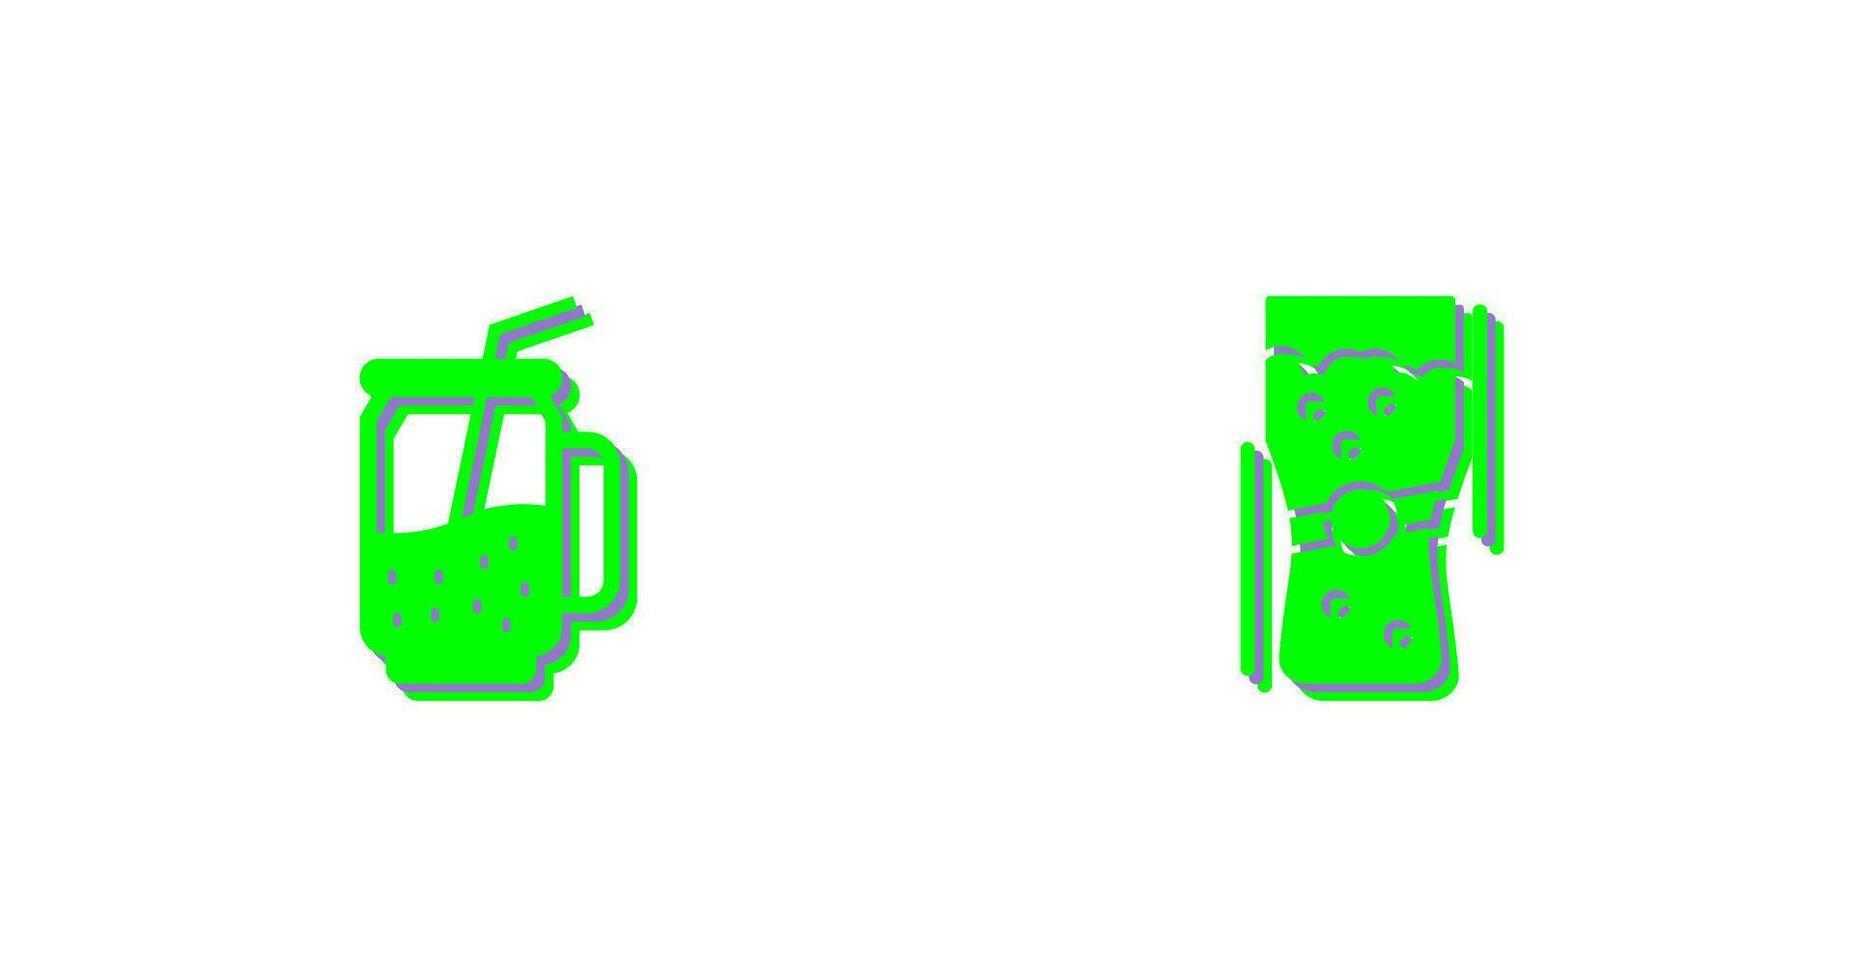 Cocktail and Pint Of Beer Icon vector